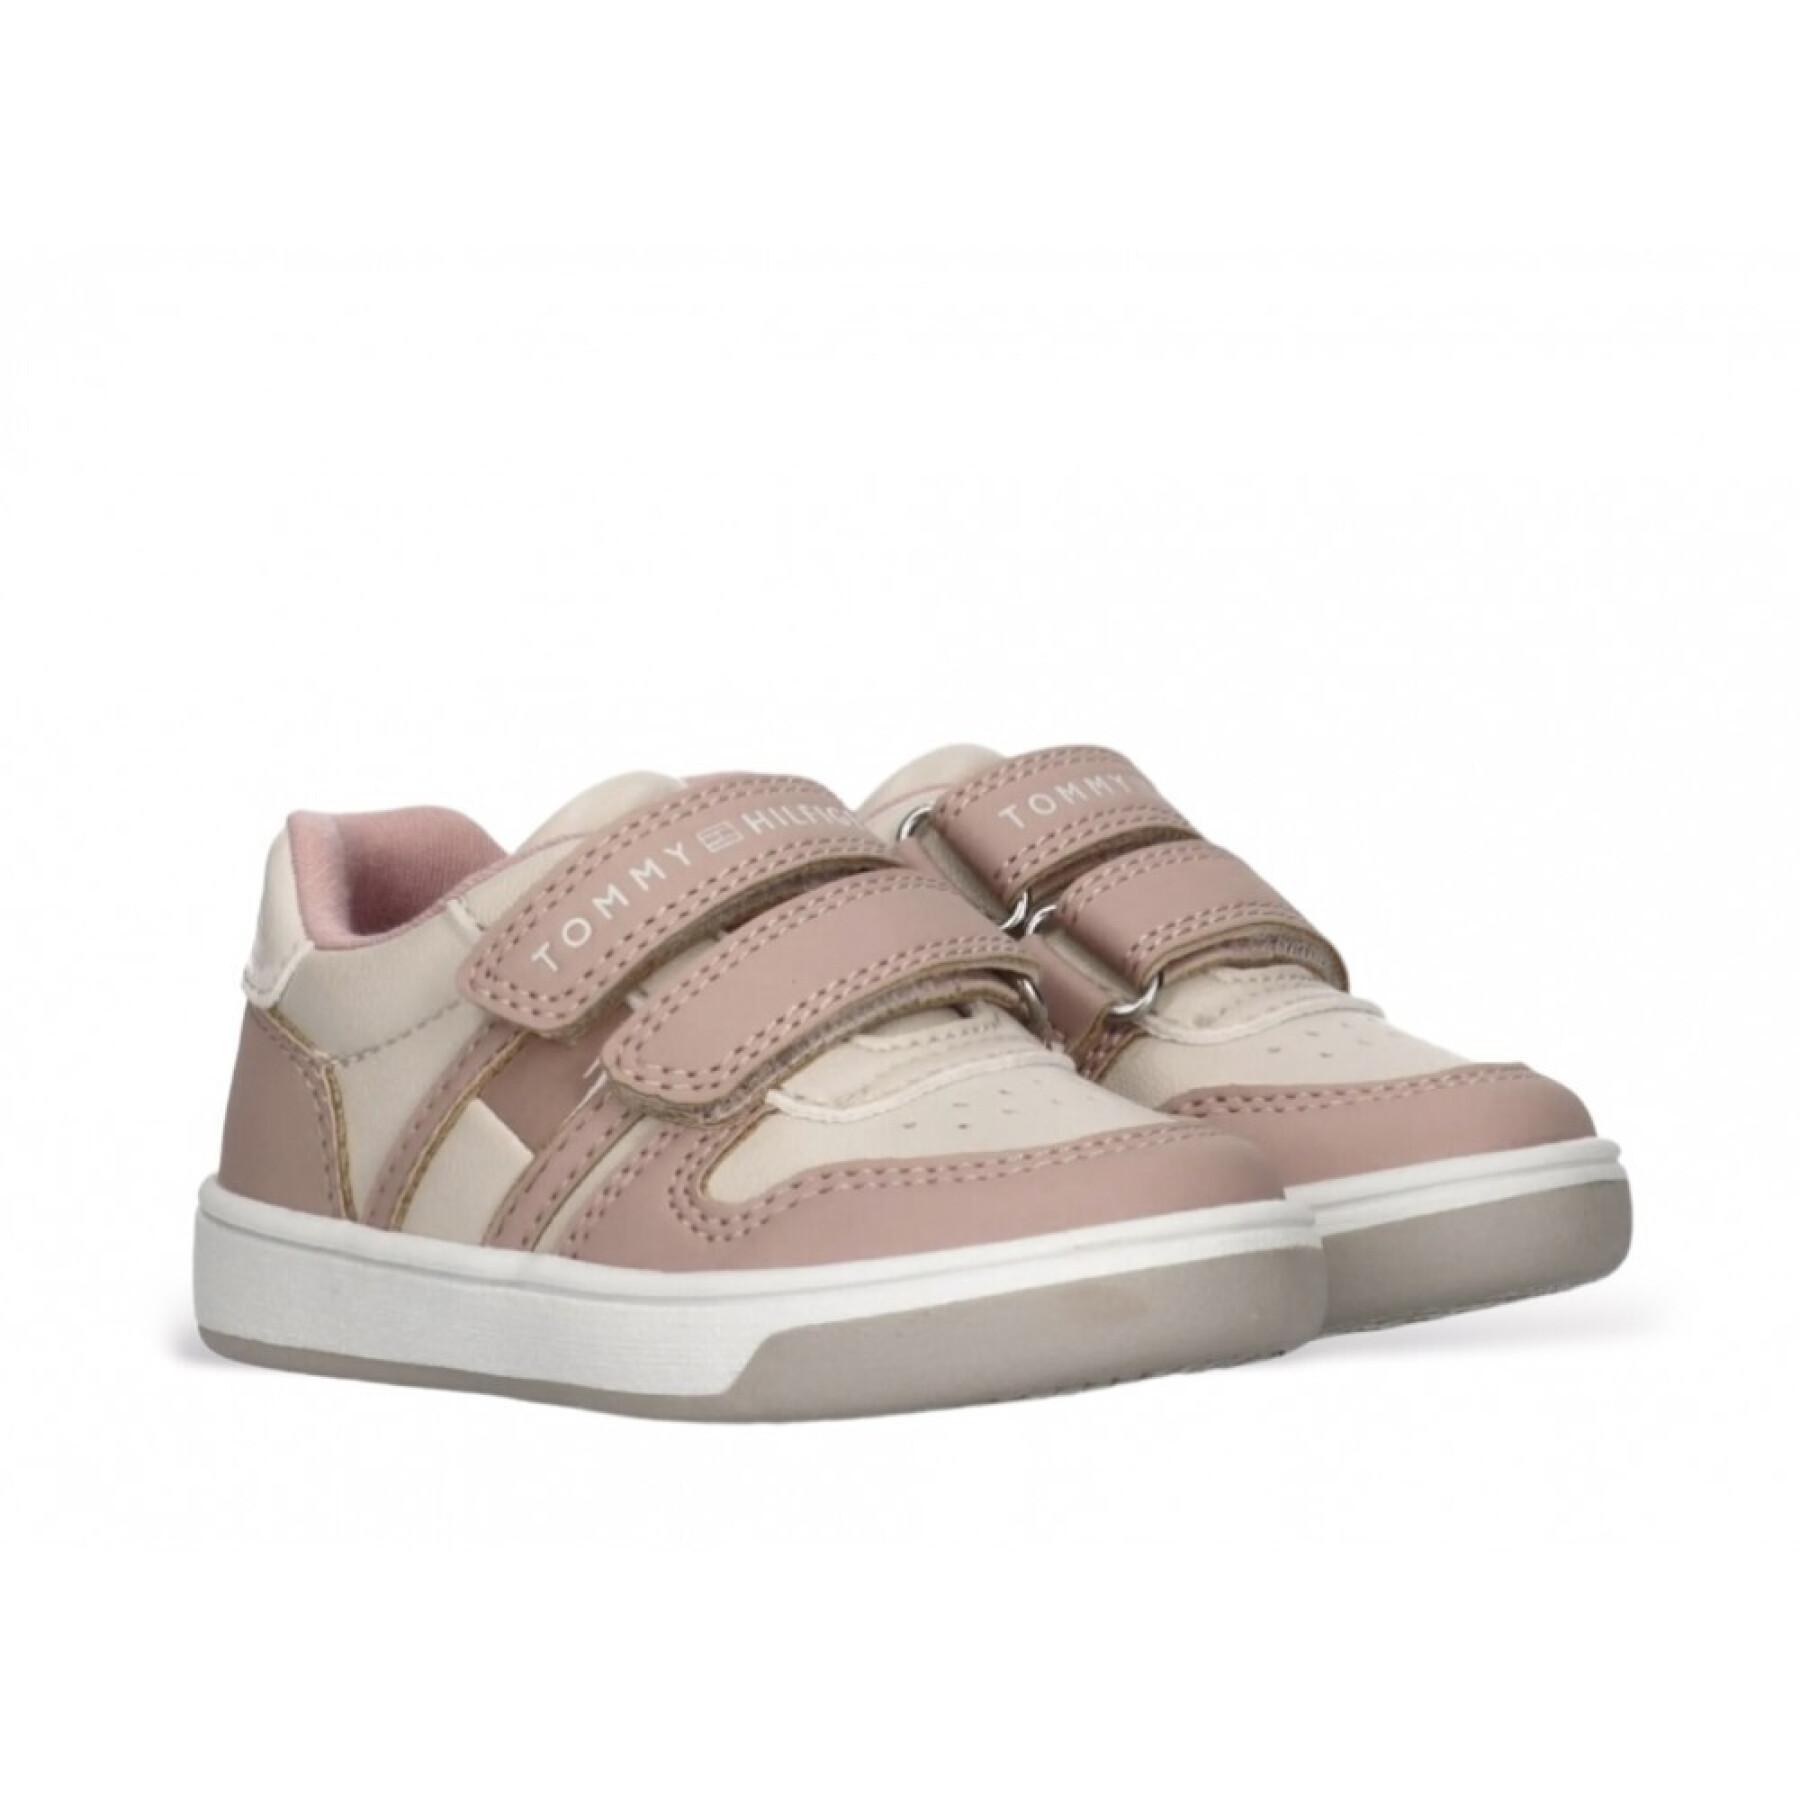 Velcro flag low cut sneakers for kids Tommy Hilfiger